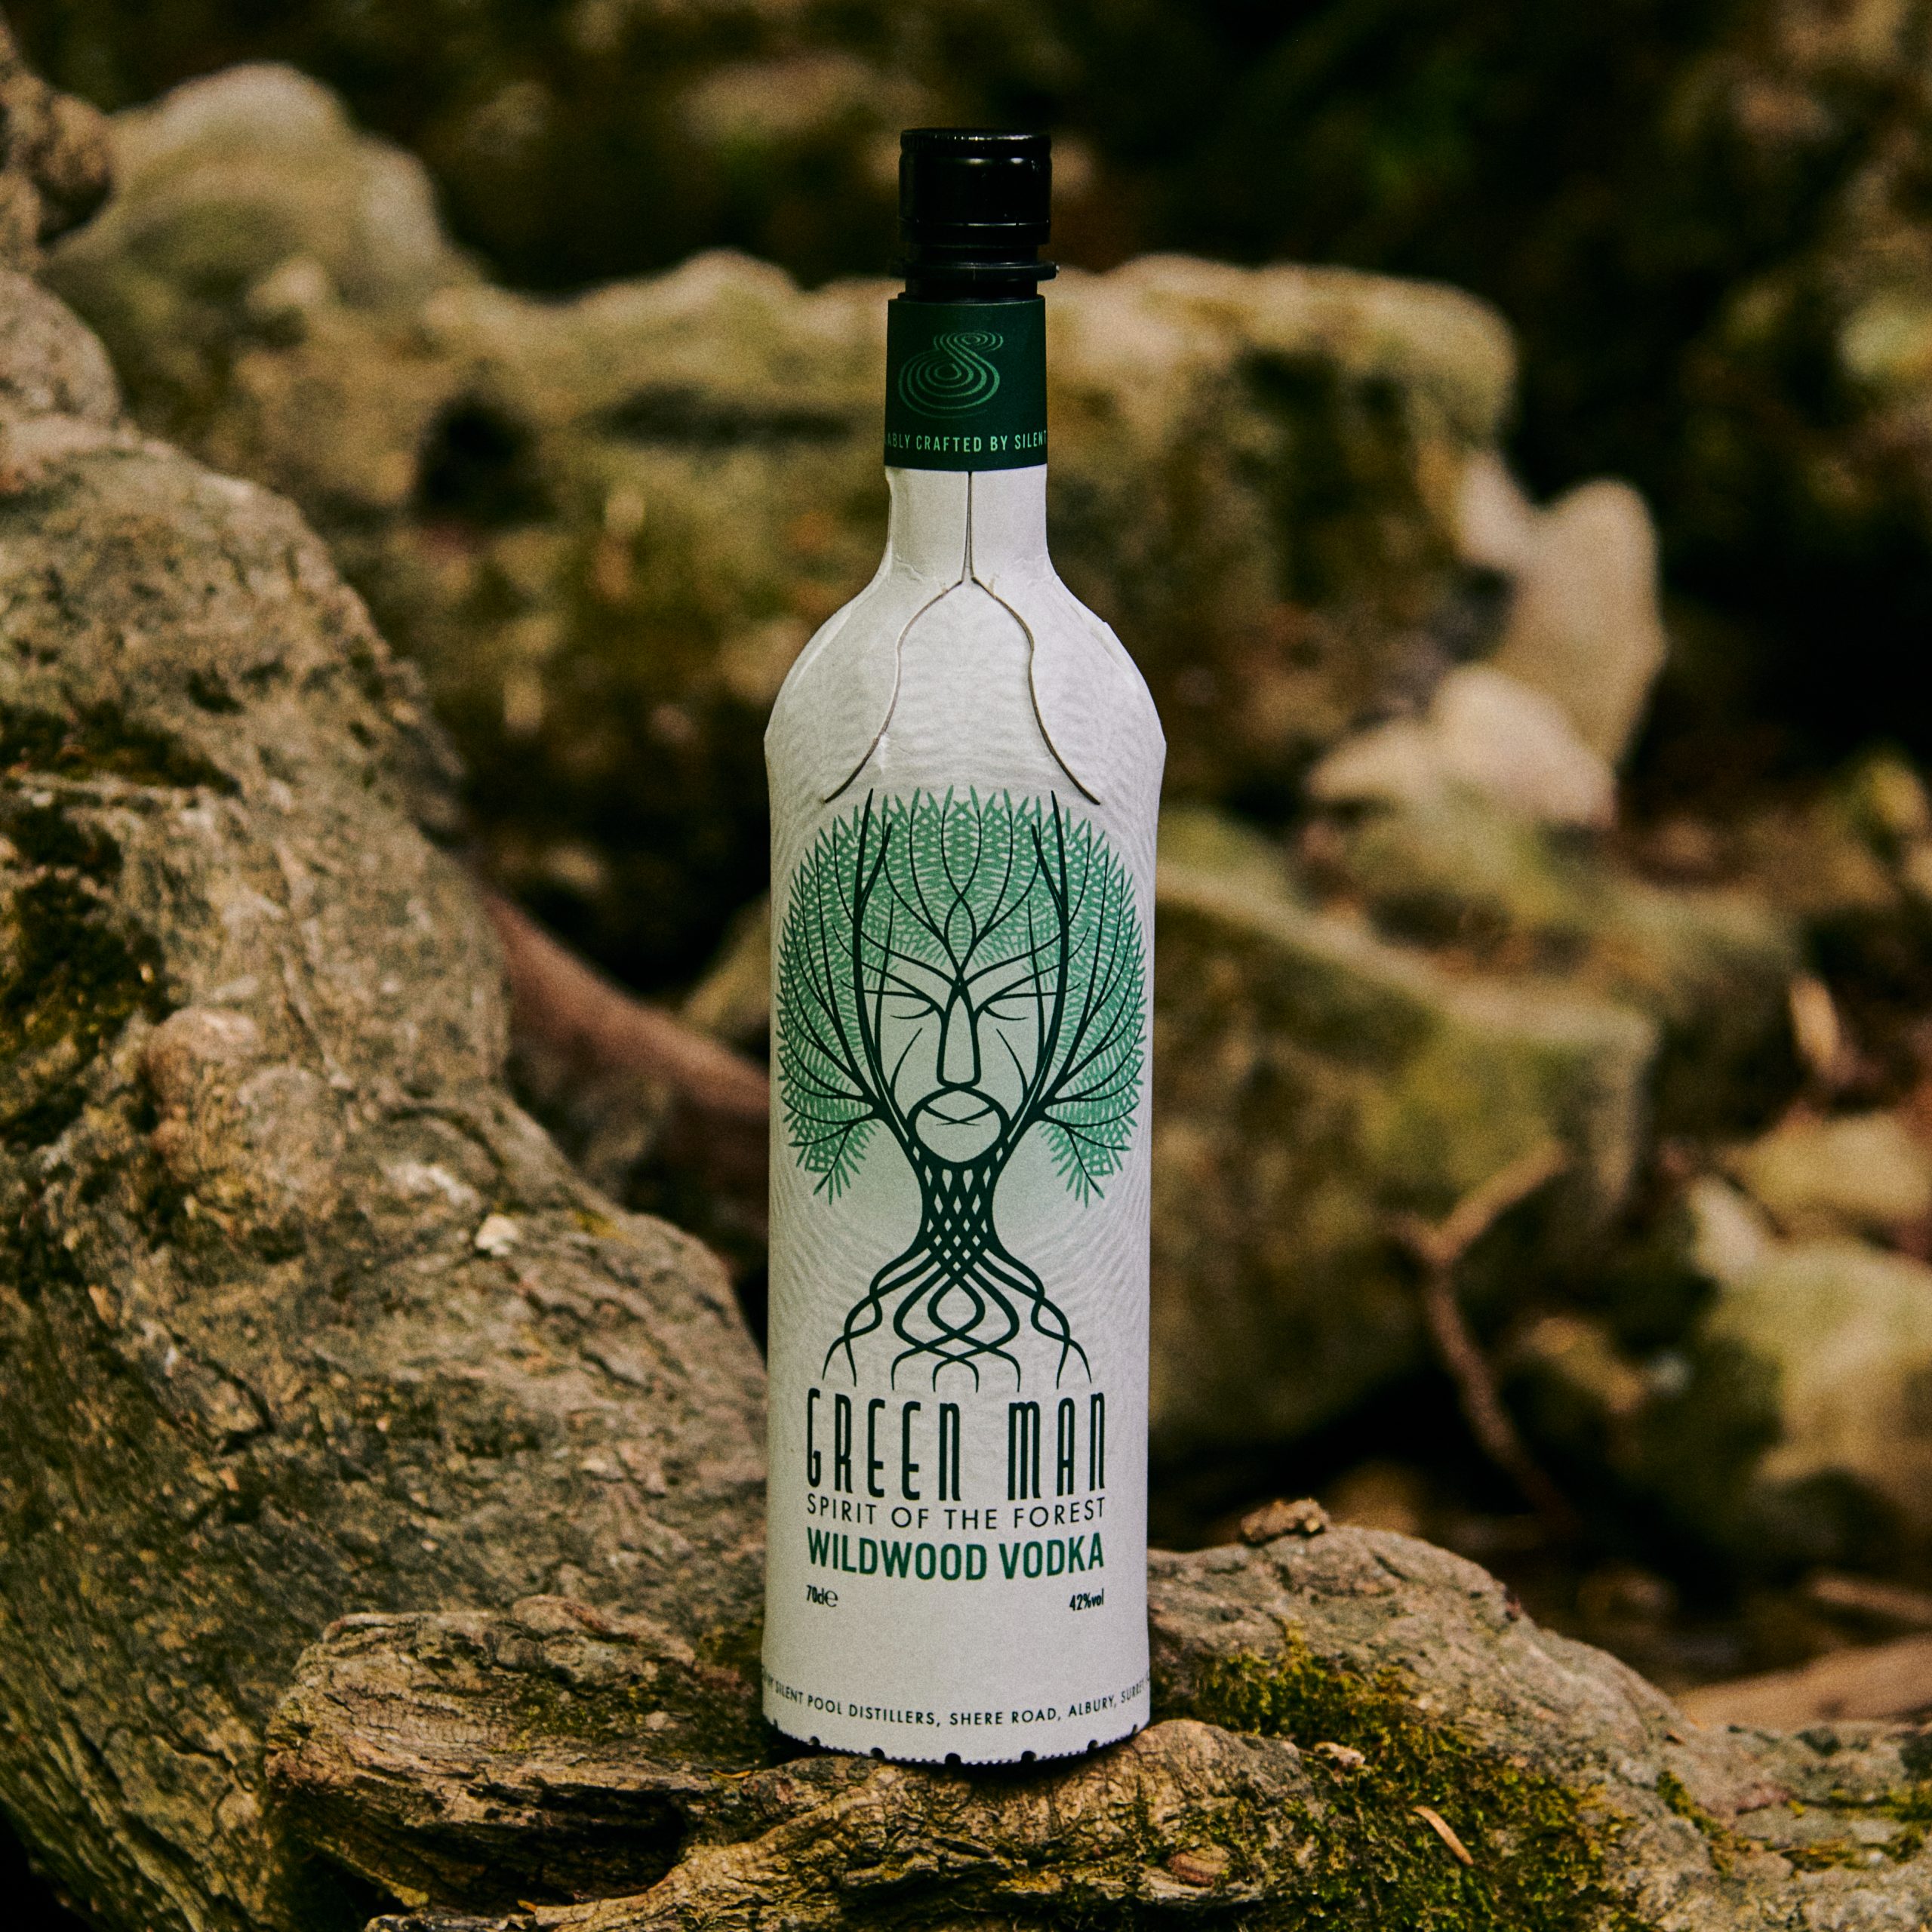 Silent Pool launches vodka in 94% recyclable a bottle cardboard